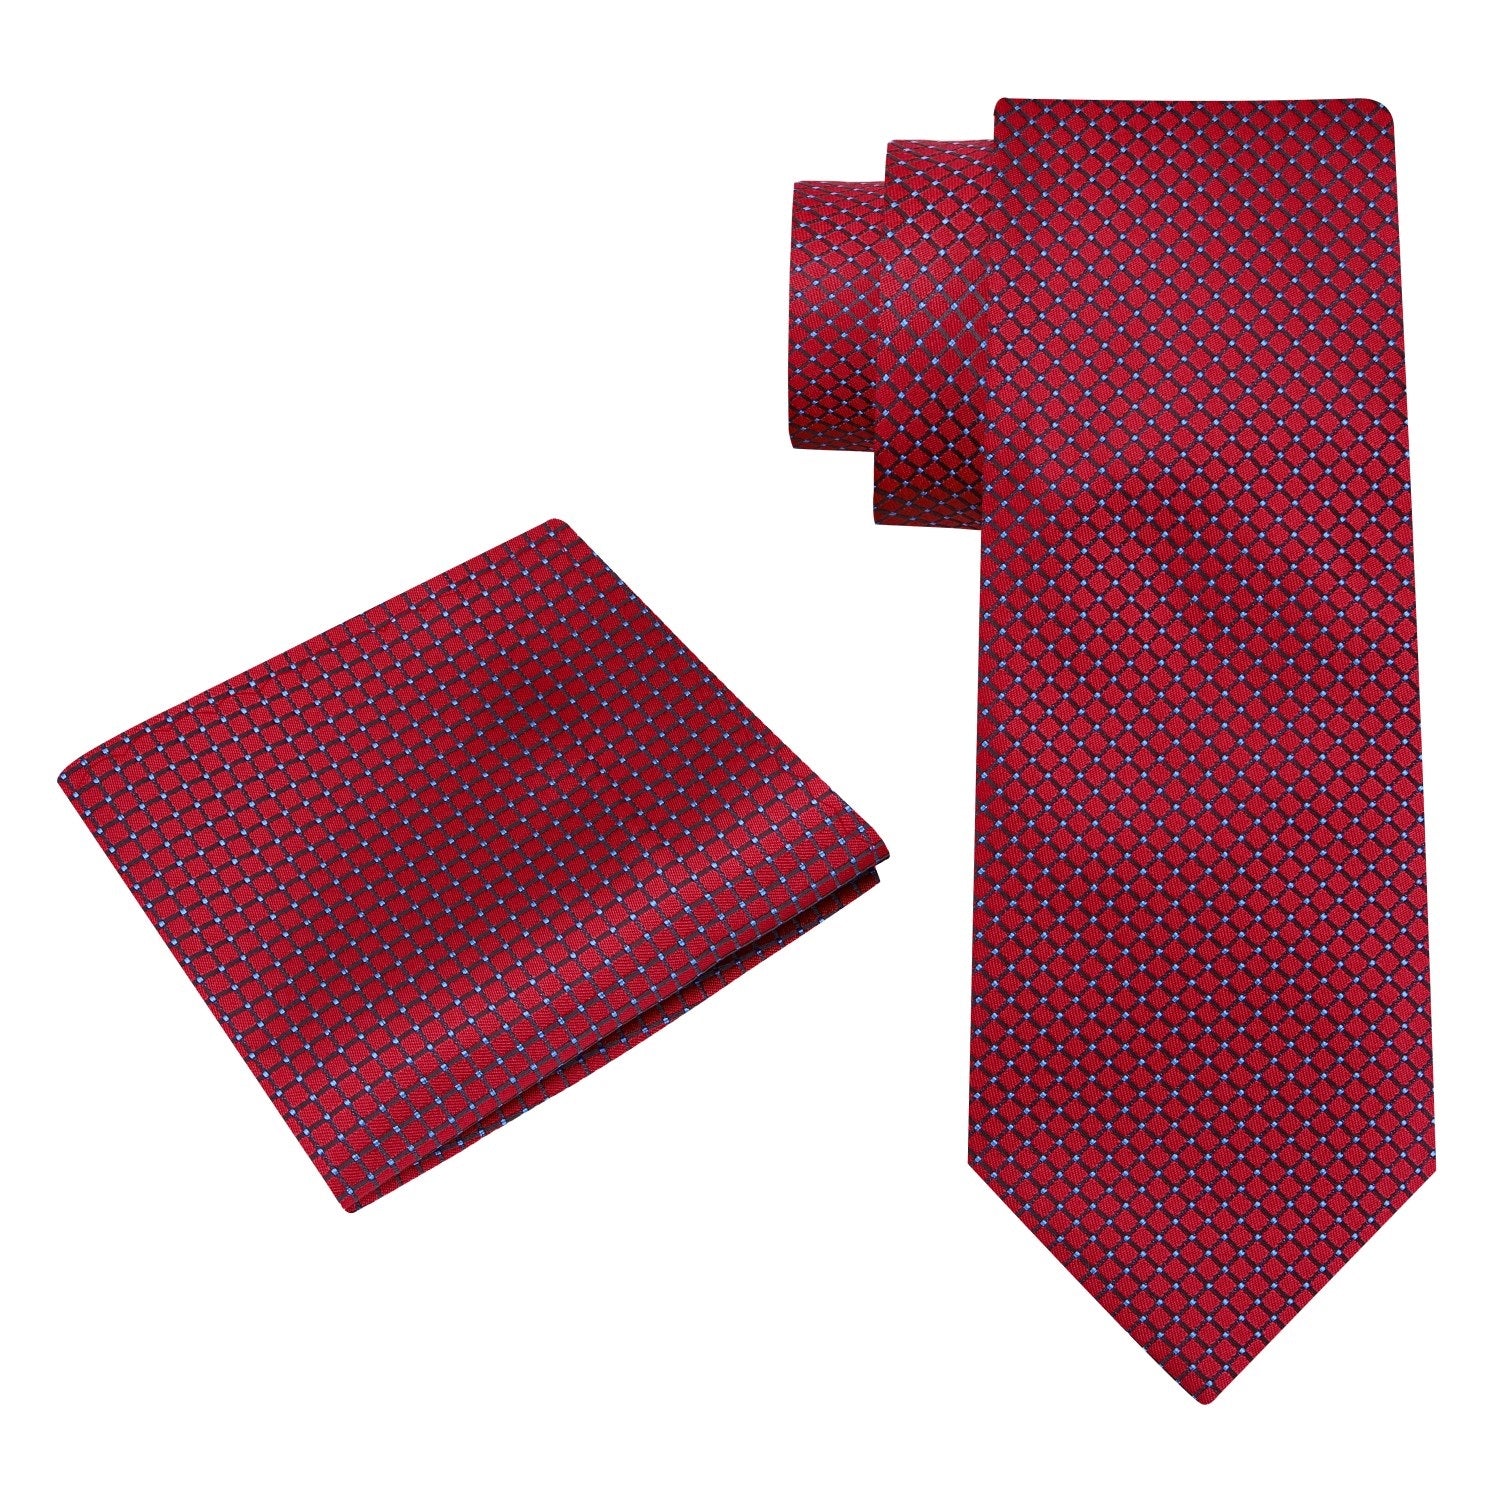 Alt View: Red Geometric Tie with Matching Pocket Square